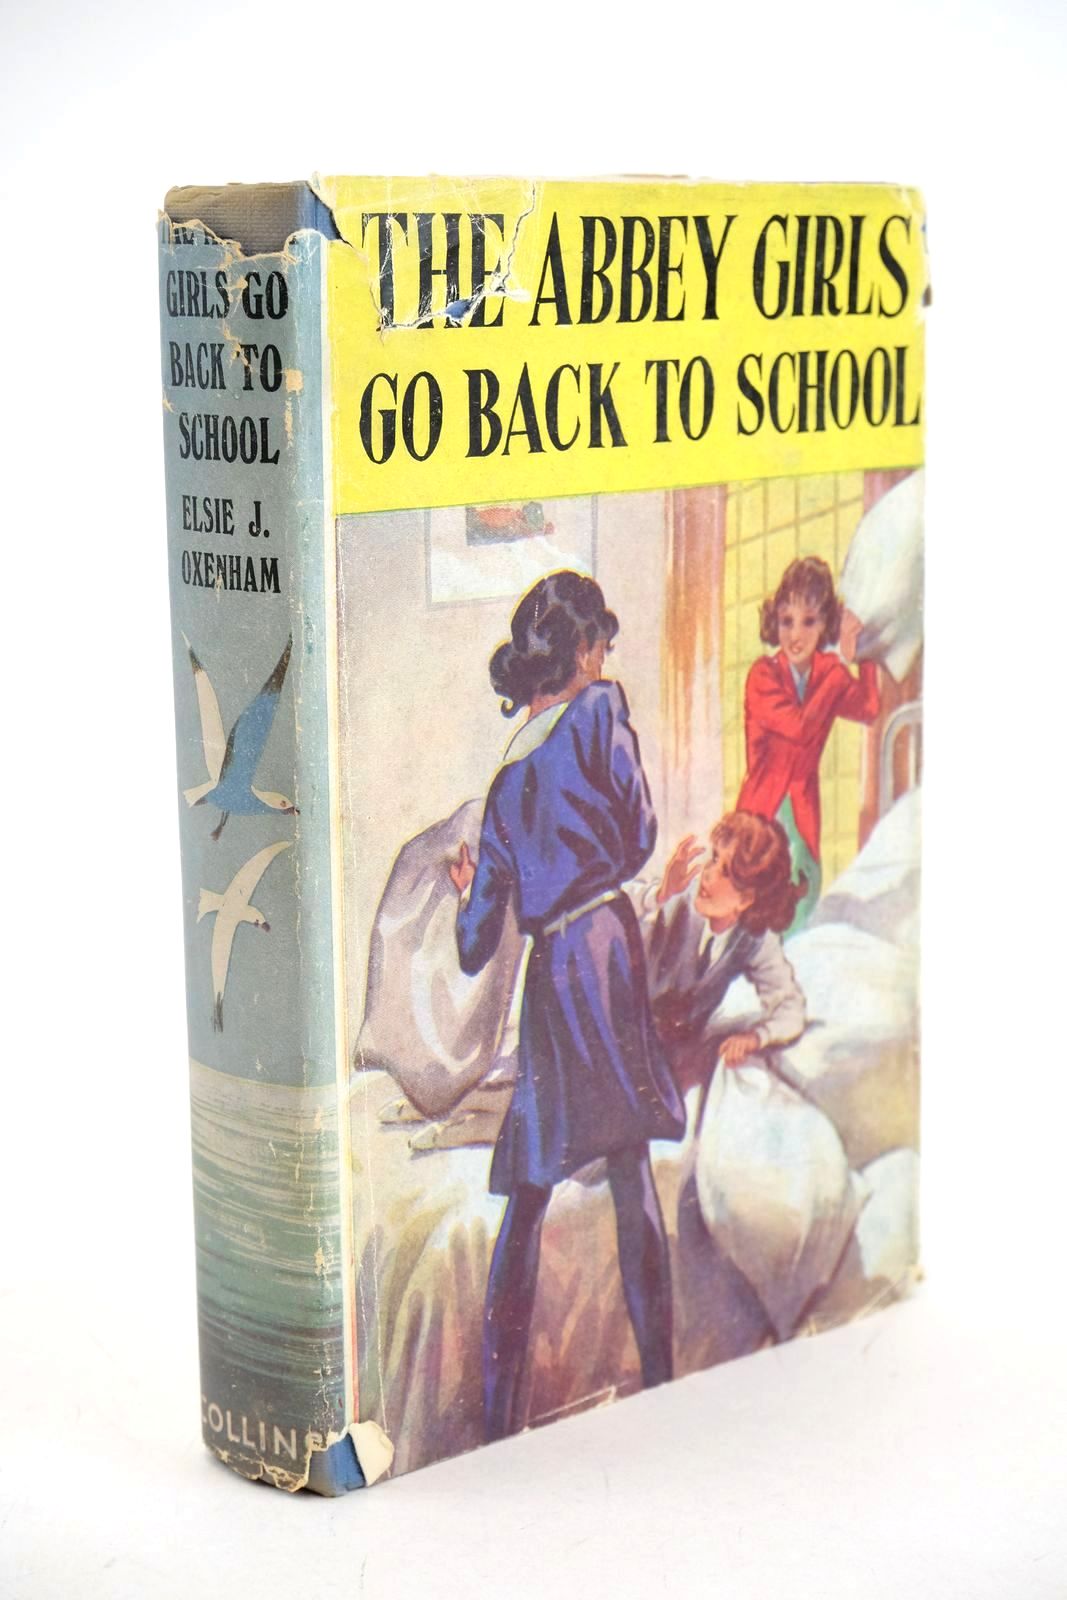 Photo of THE ABBEY GIRLS GO BACK TO SCHOOL written by Oxenham, Elsie J. published by Collins (STOCK CODE: 1326845)  for sale by Stella & Rose's Books